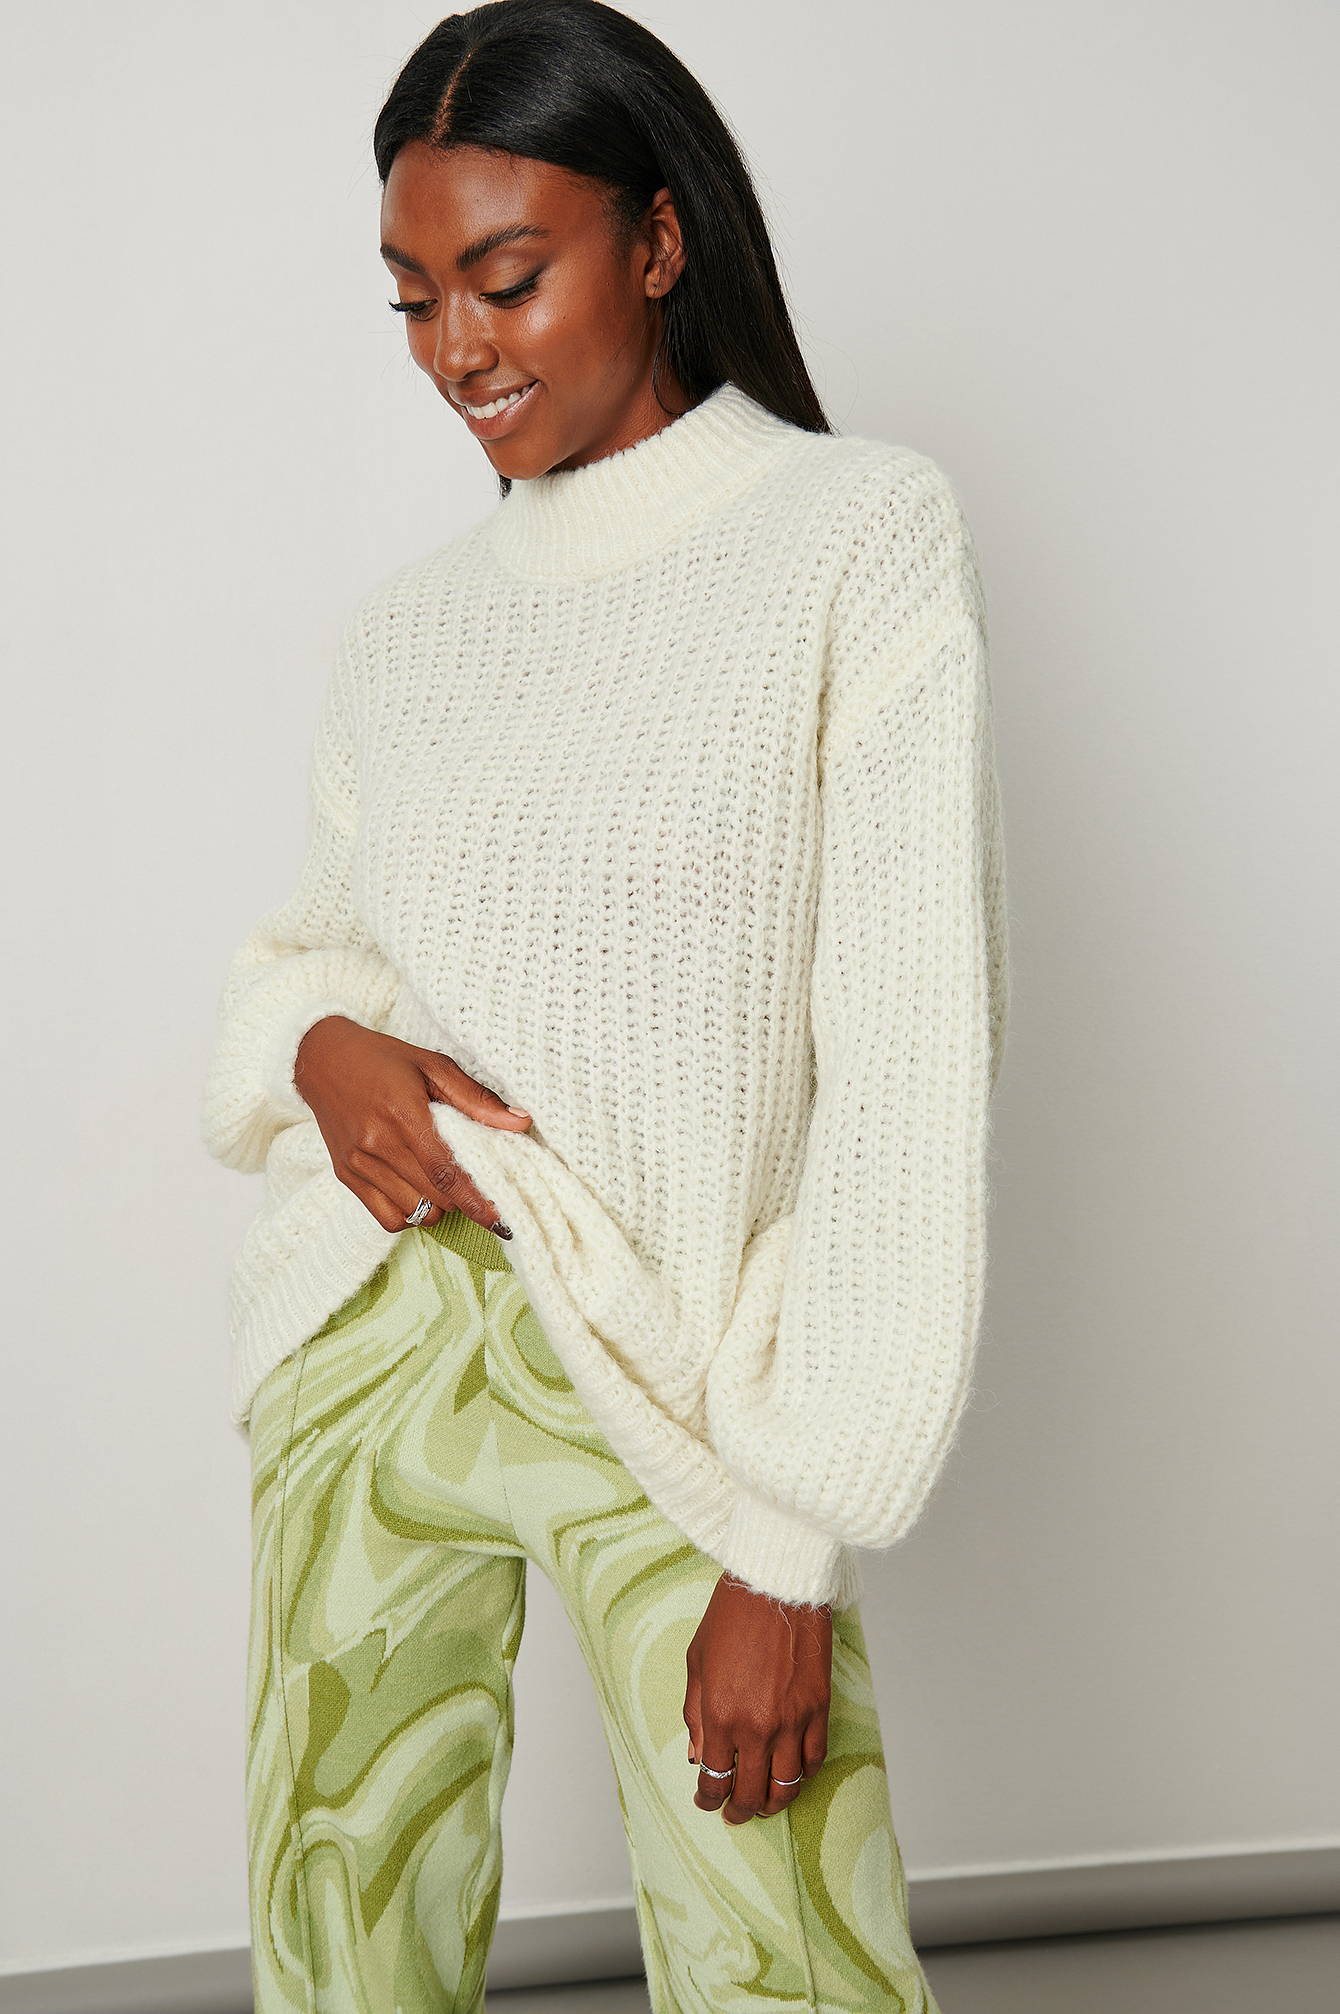 Oversized Knitted Sweater Outfit.